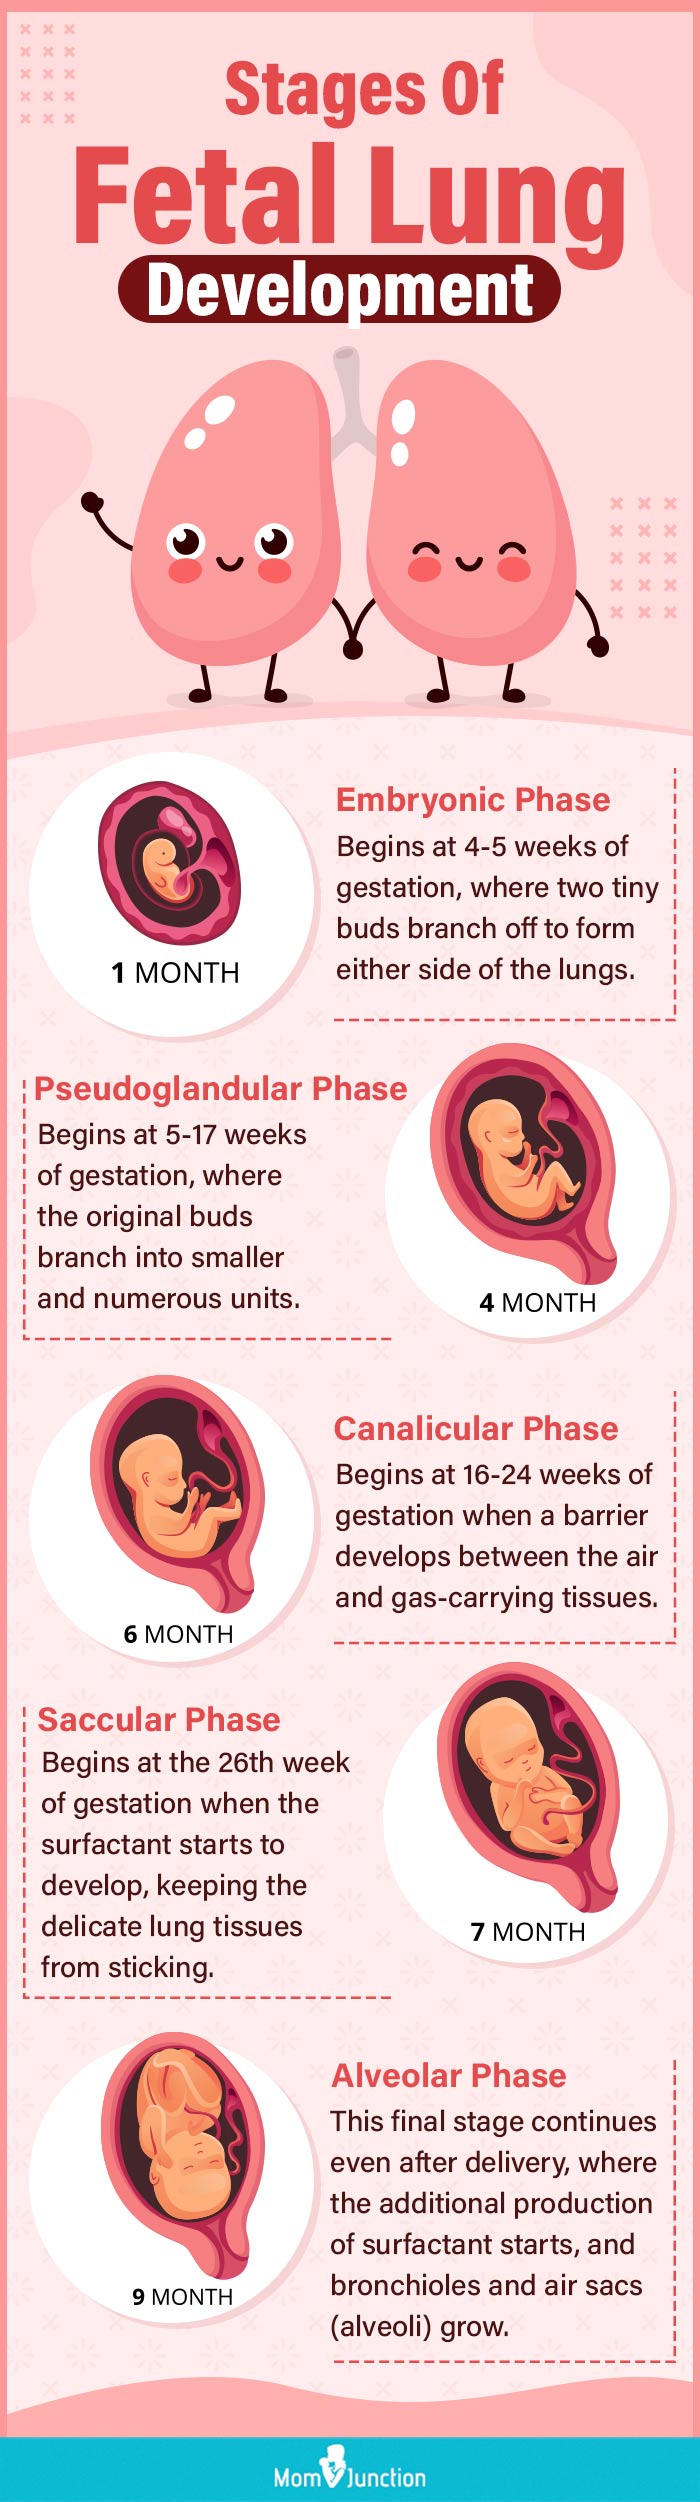 stages of fetal lung development (infographic)